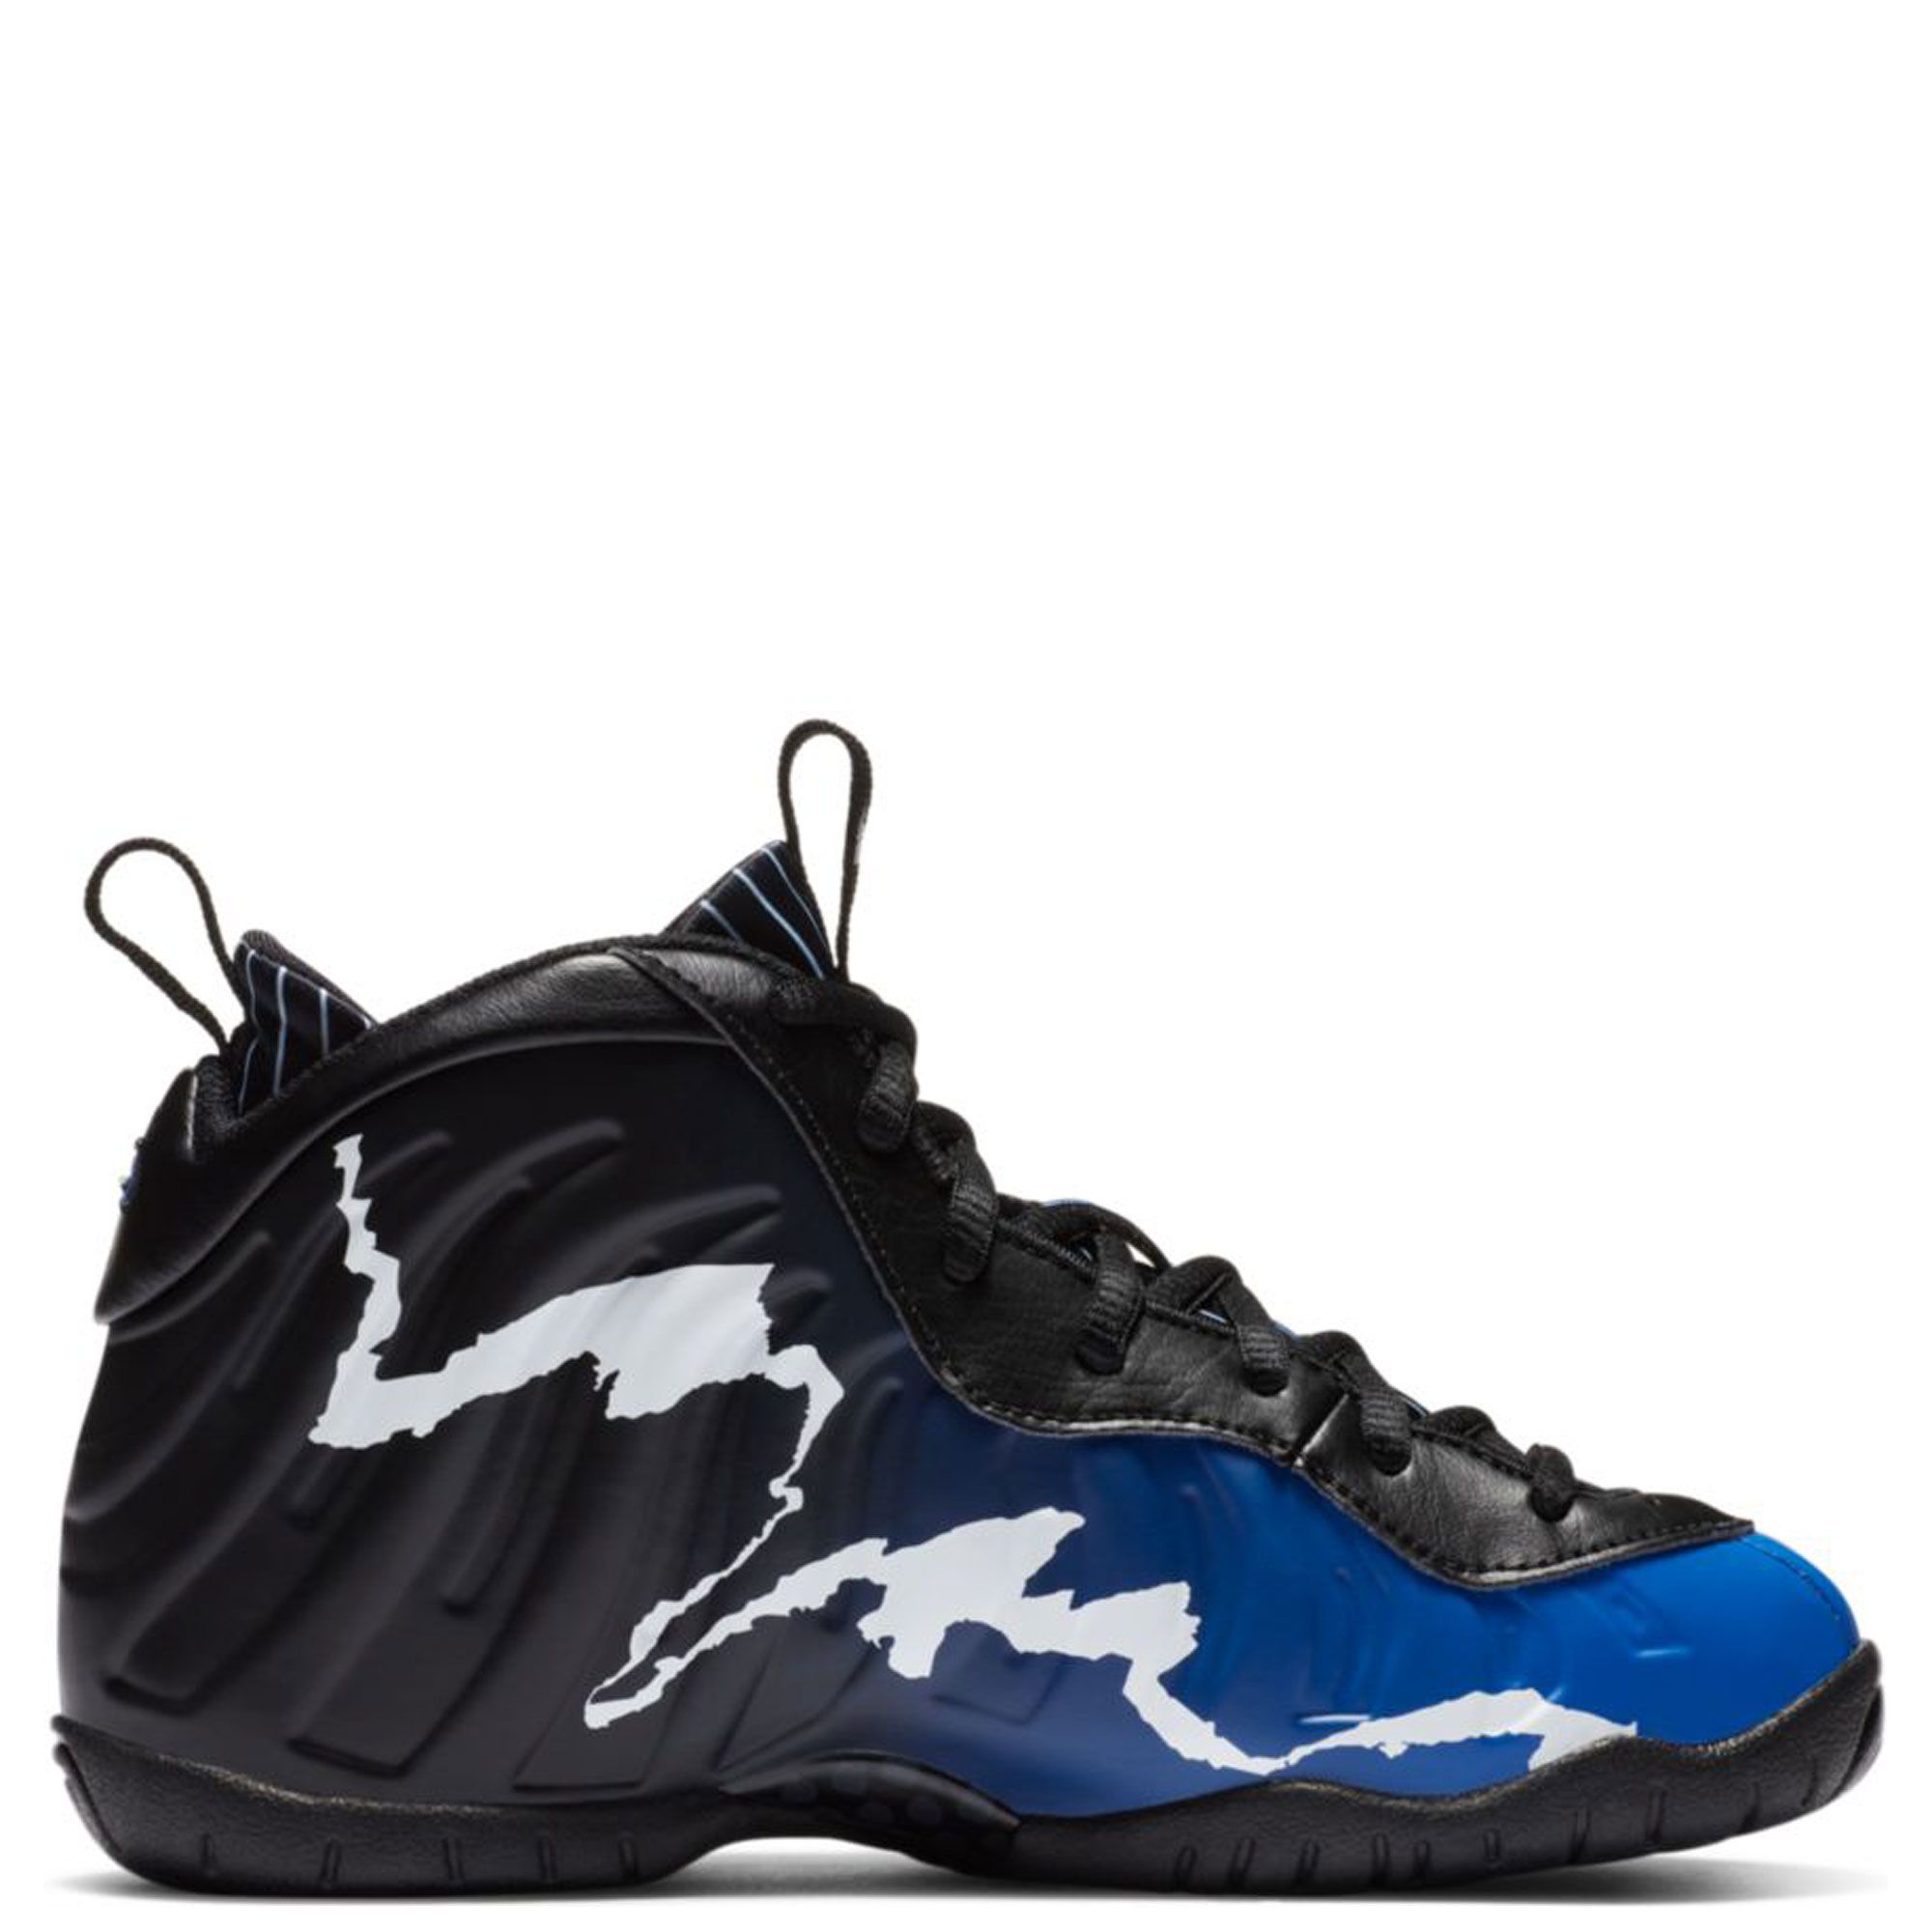 nike little posite one white and black